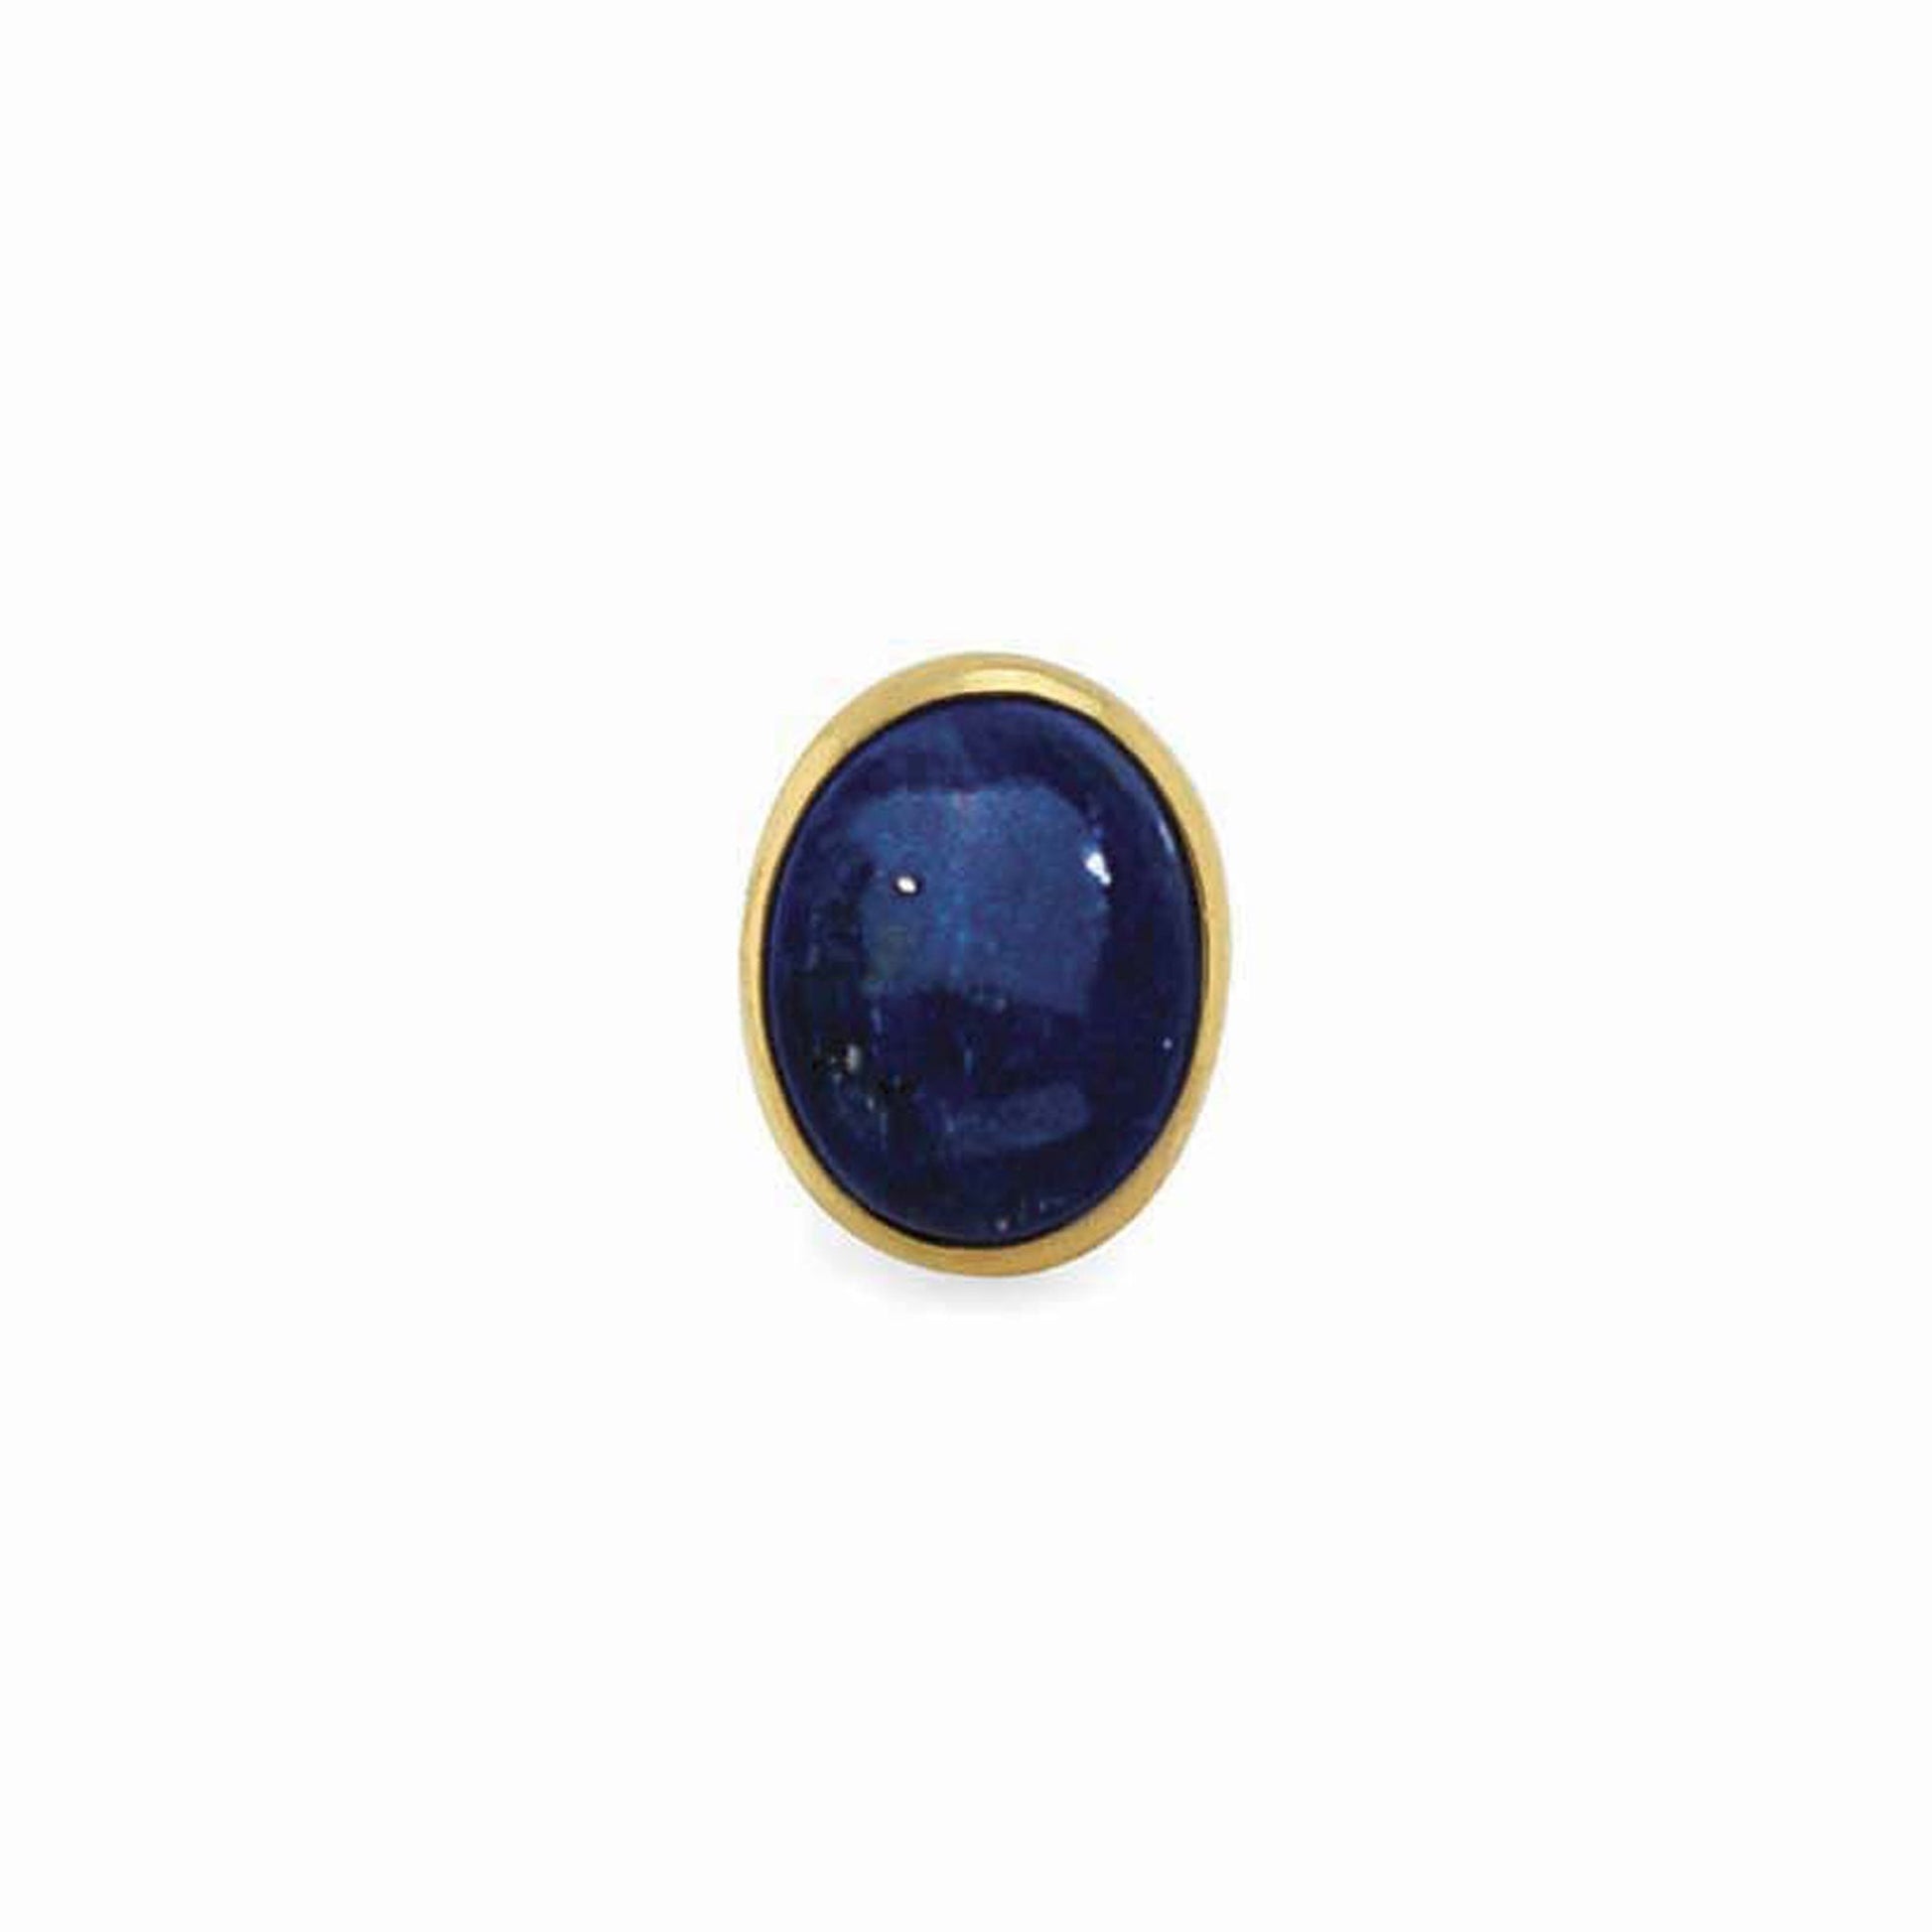 A 14k yellow gold lapis lazuli tie tack displayed on a neutral white background.